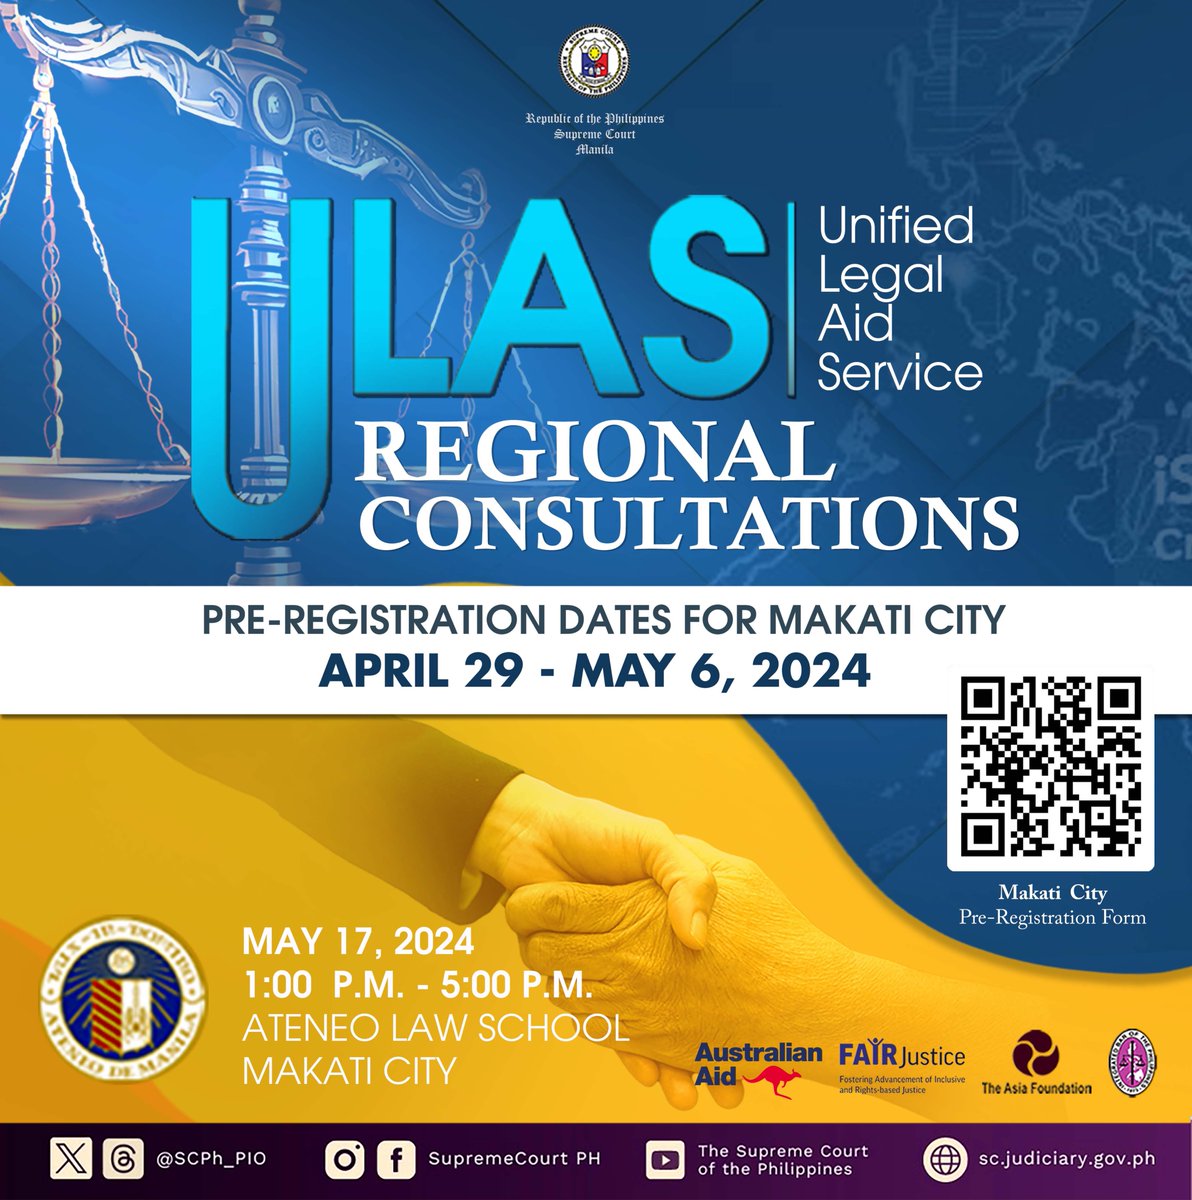 The Supreme Court will be conducting the third leg of the ULAS Regional Consultations on May 17, 2024 at the Ateneo Law School, Makati City. To pre-register, you may scan the QR code when registration opens on April 29, 2024. #ULASRegionalConsultations